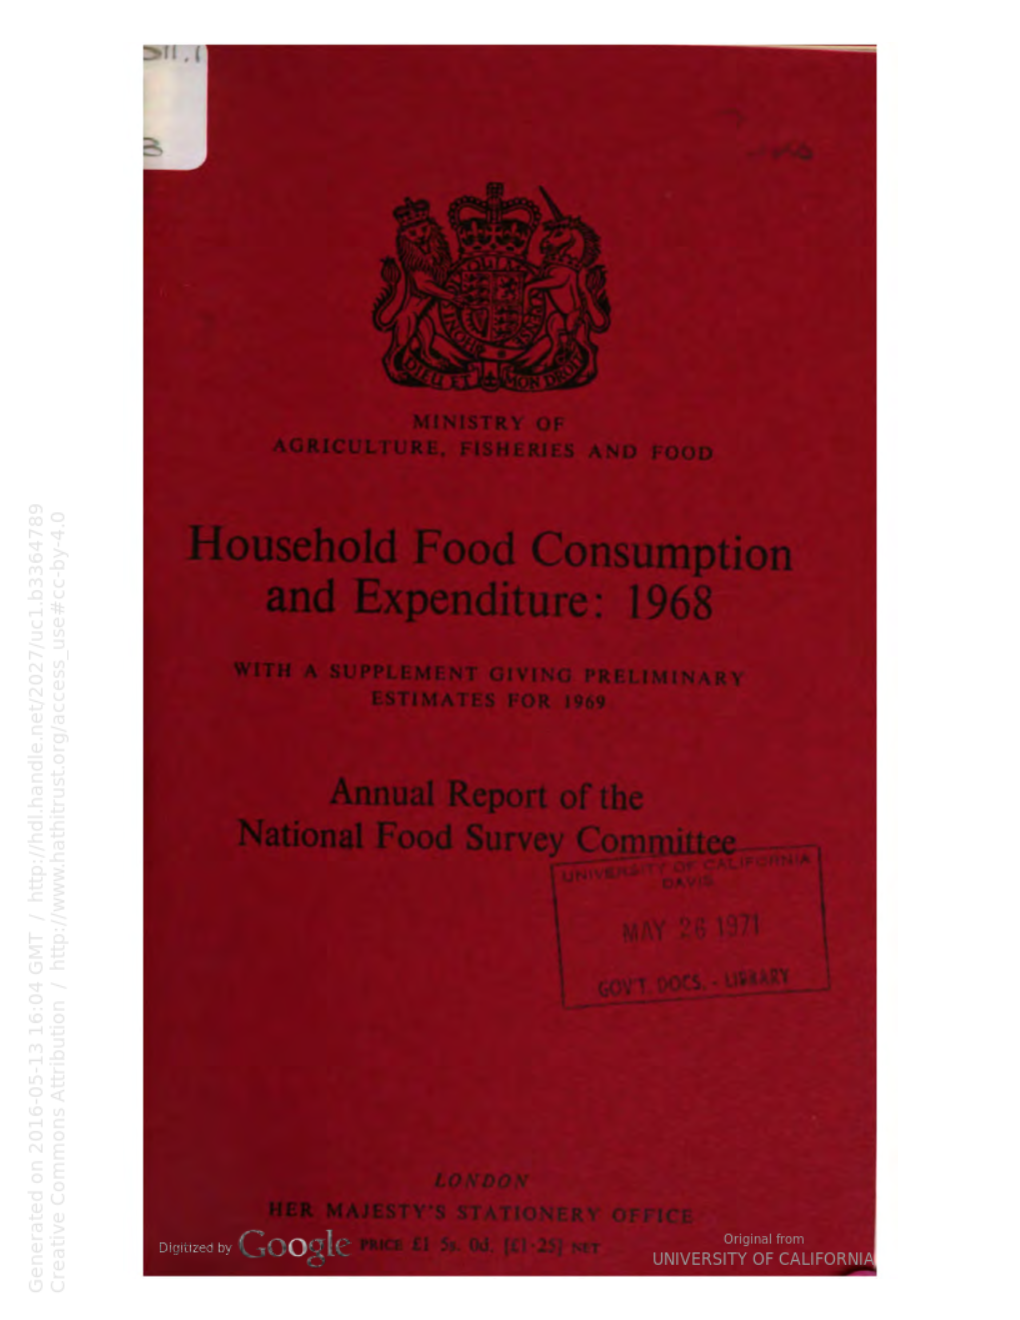 Ousehold Food Consumption and Expenditure: 1968